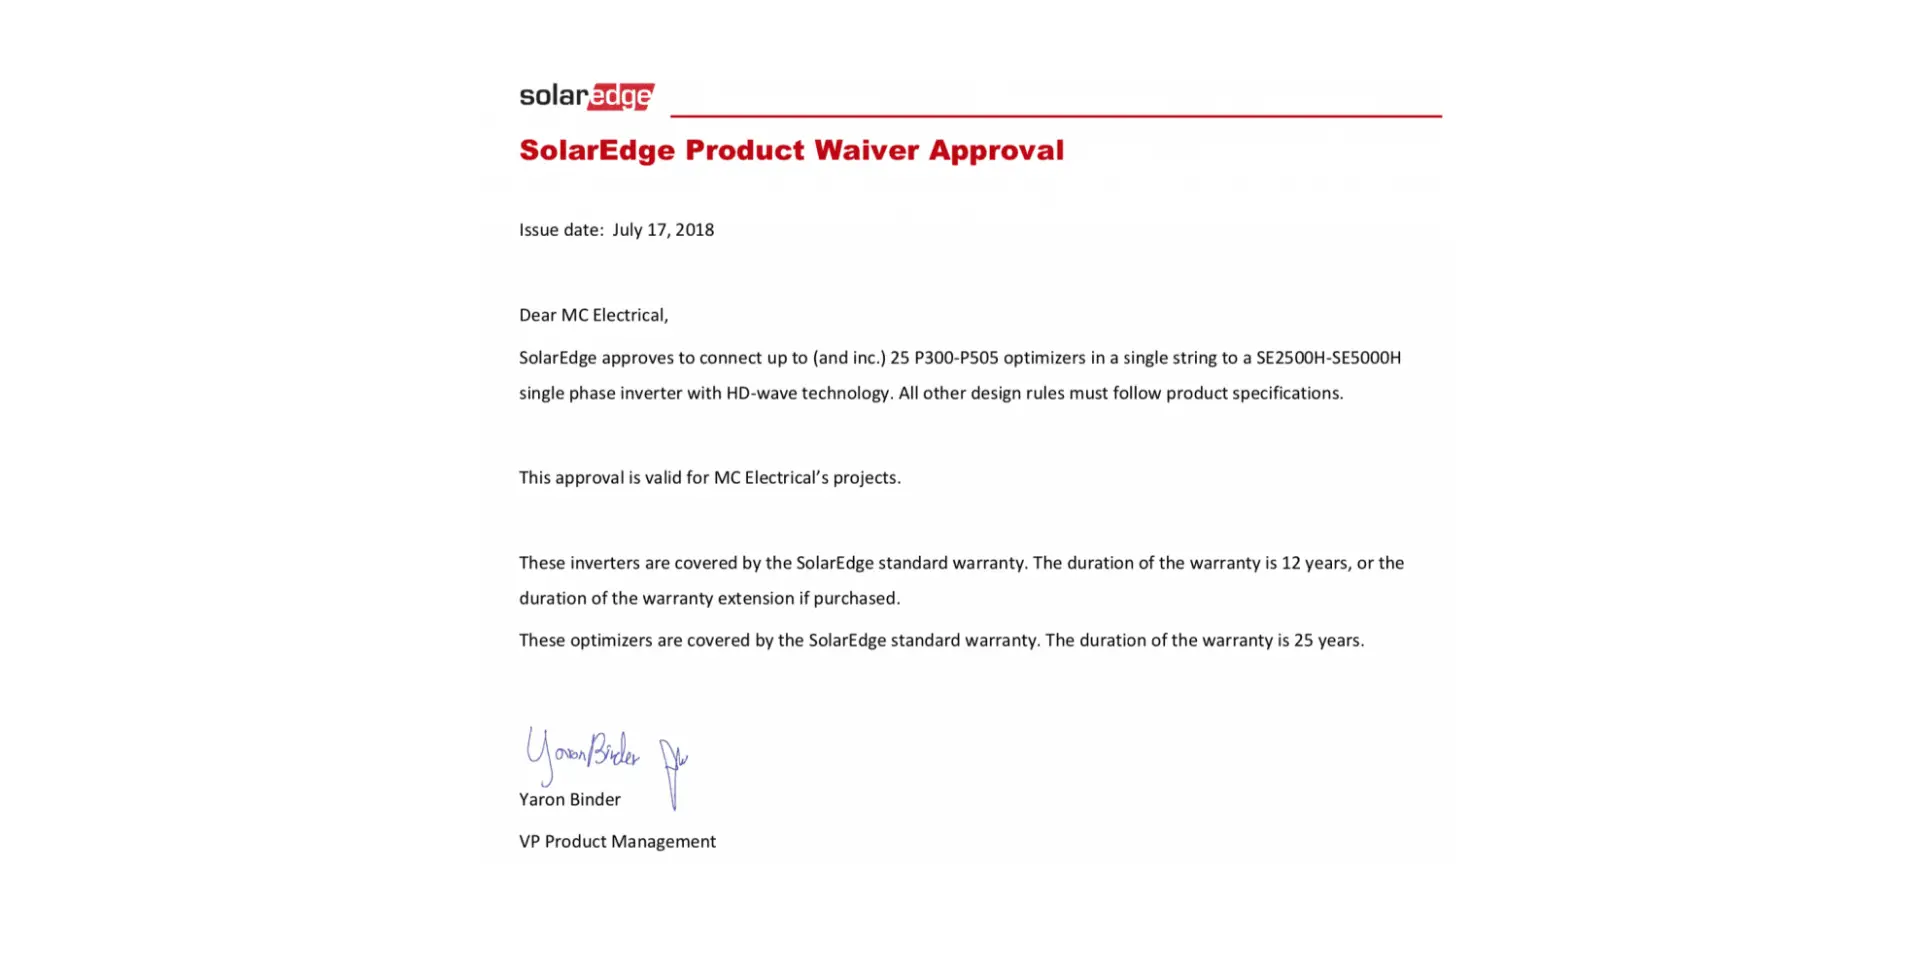 RFW-002040 Waiver Approval